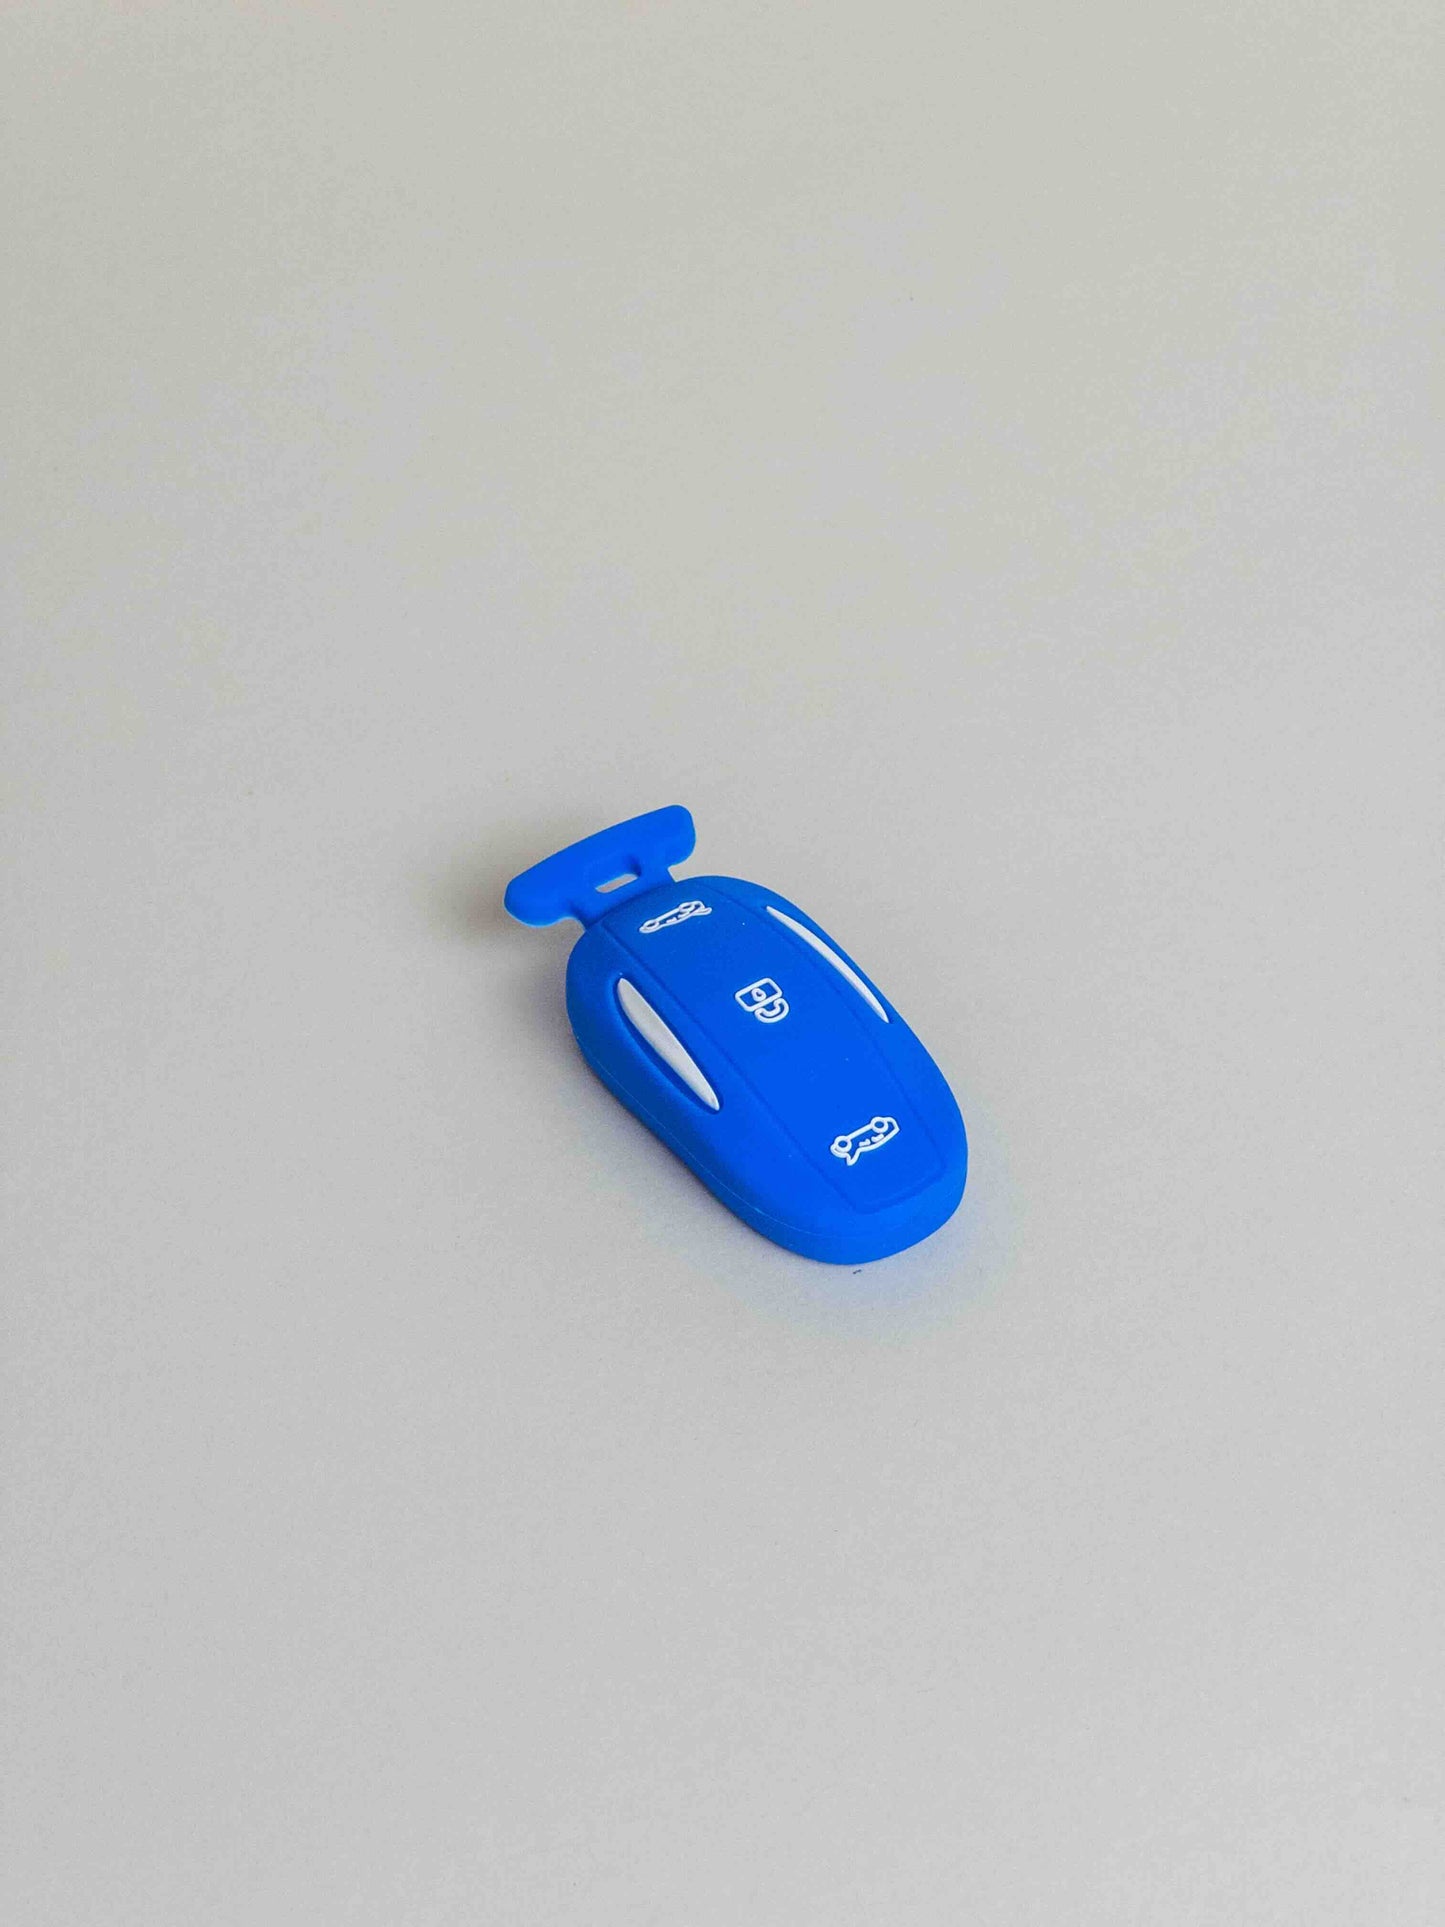 Model X keyfob protection in many colors